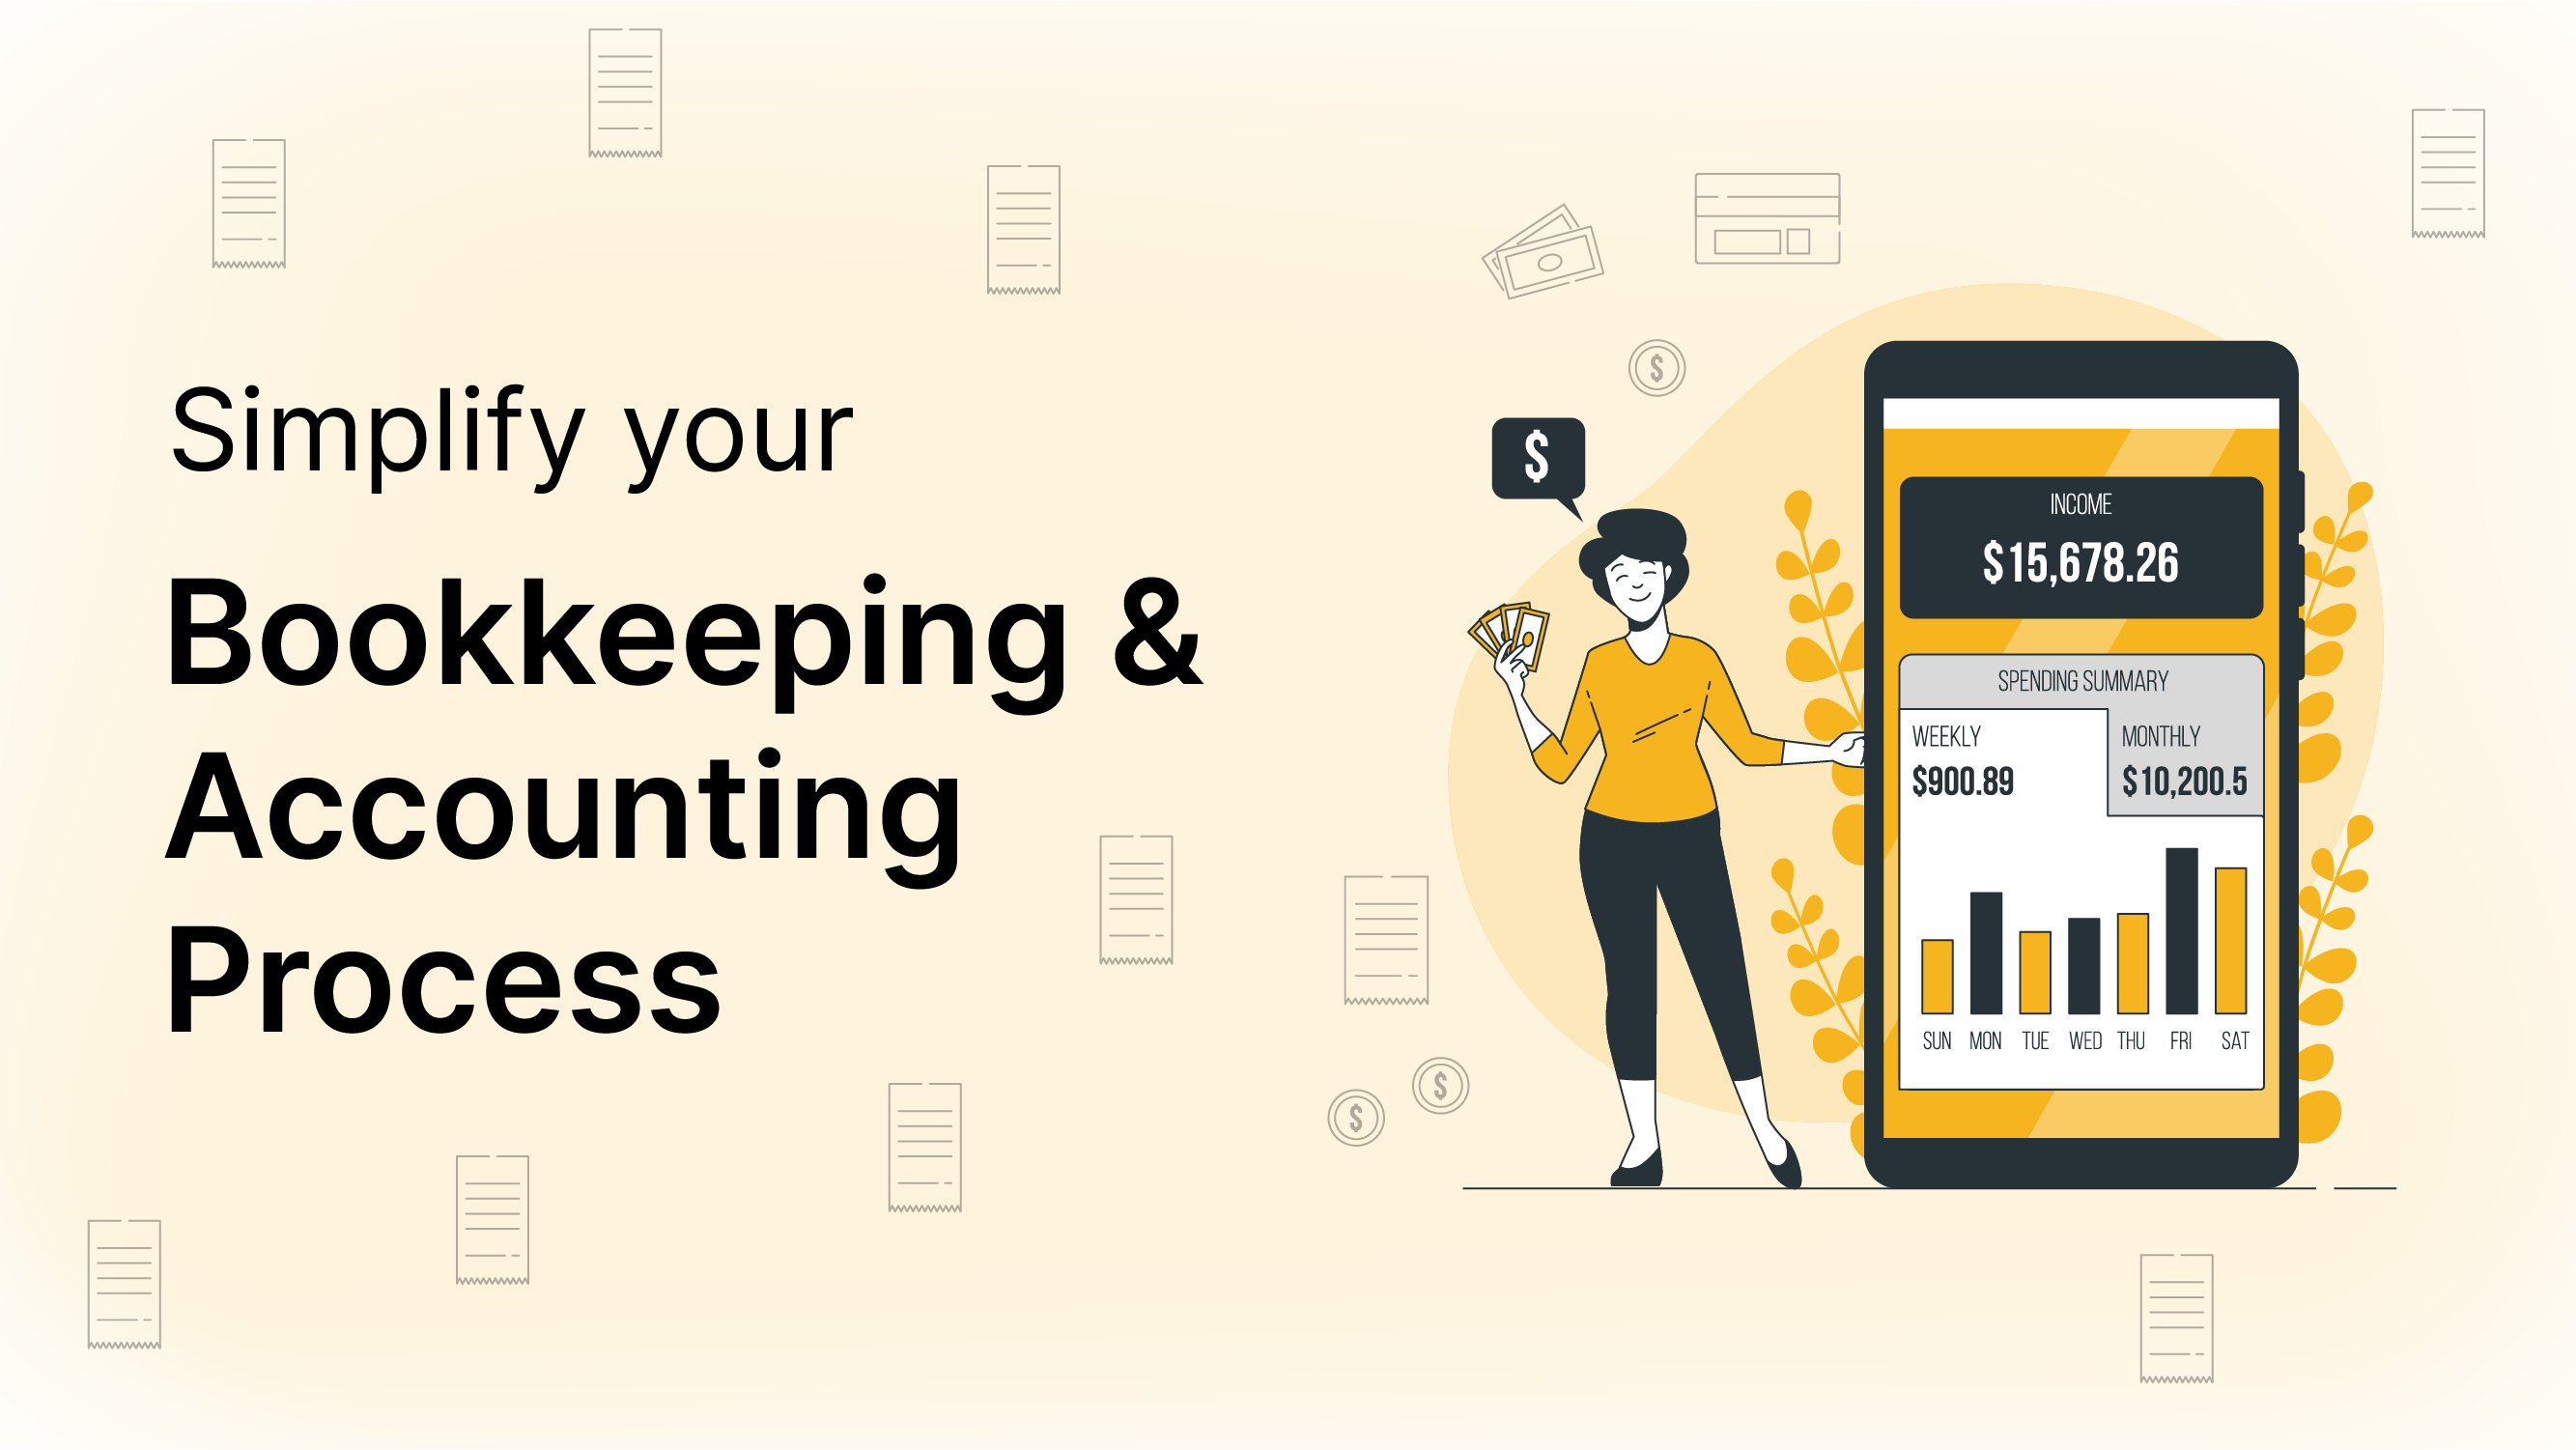 Outsourced Accounting is the Key to Growing Your Small Business